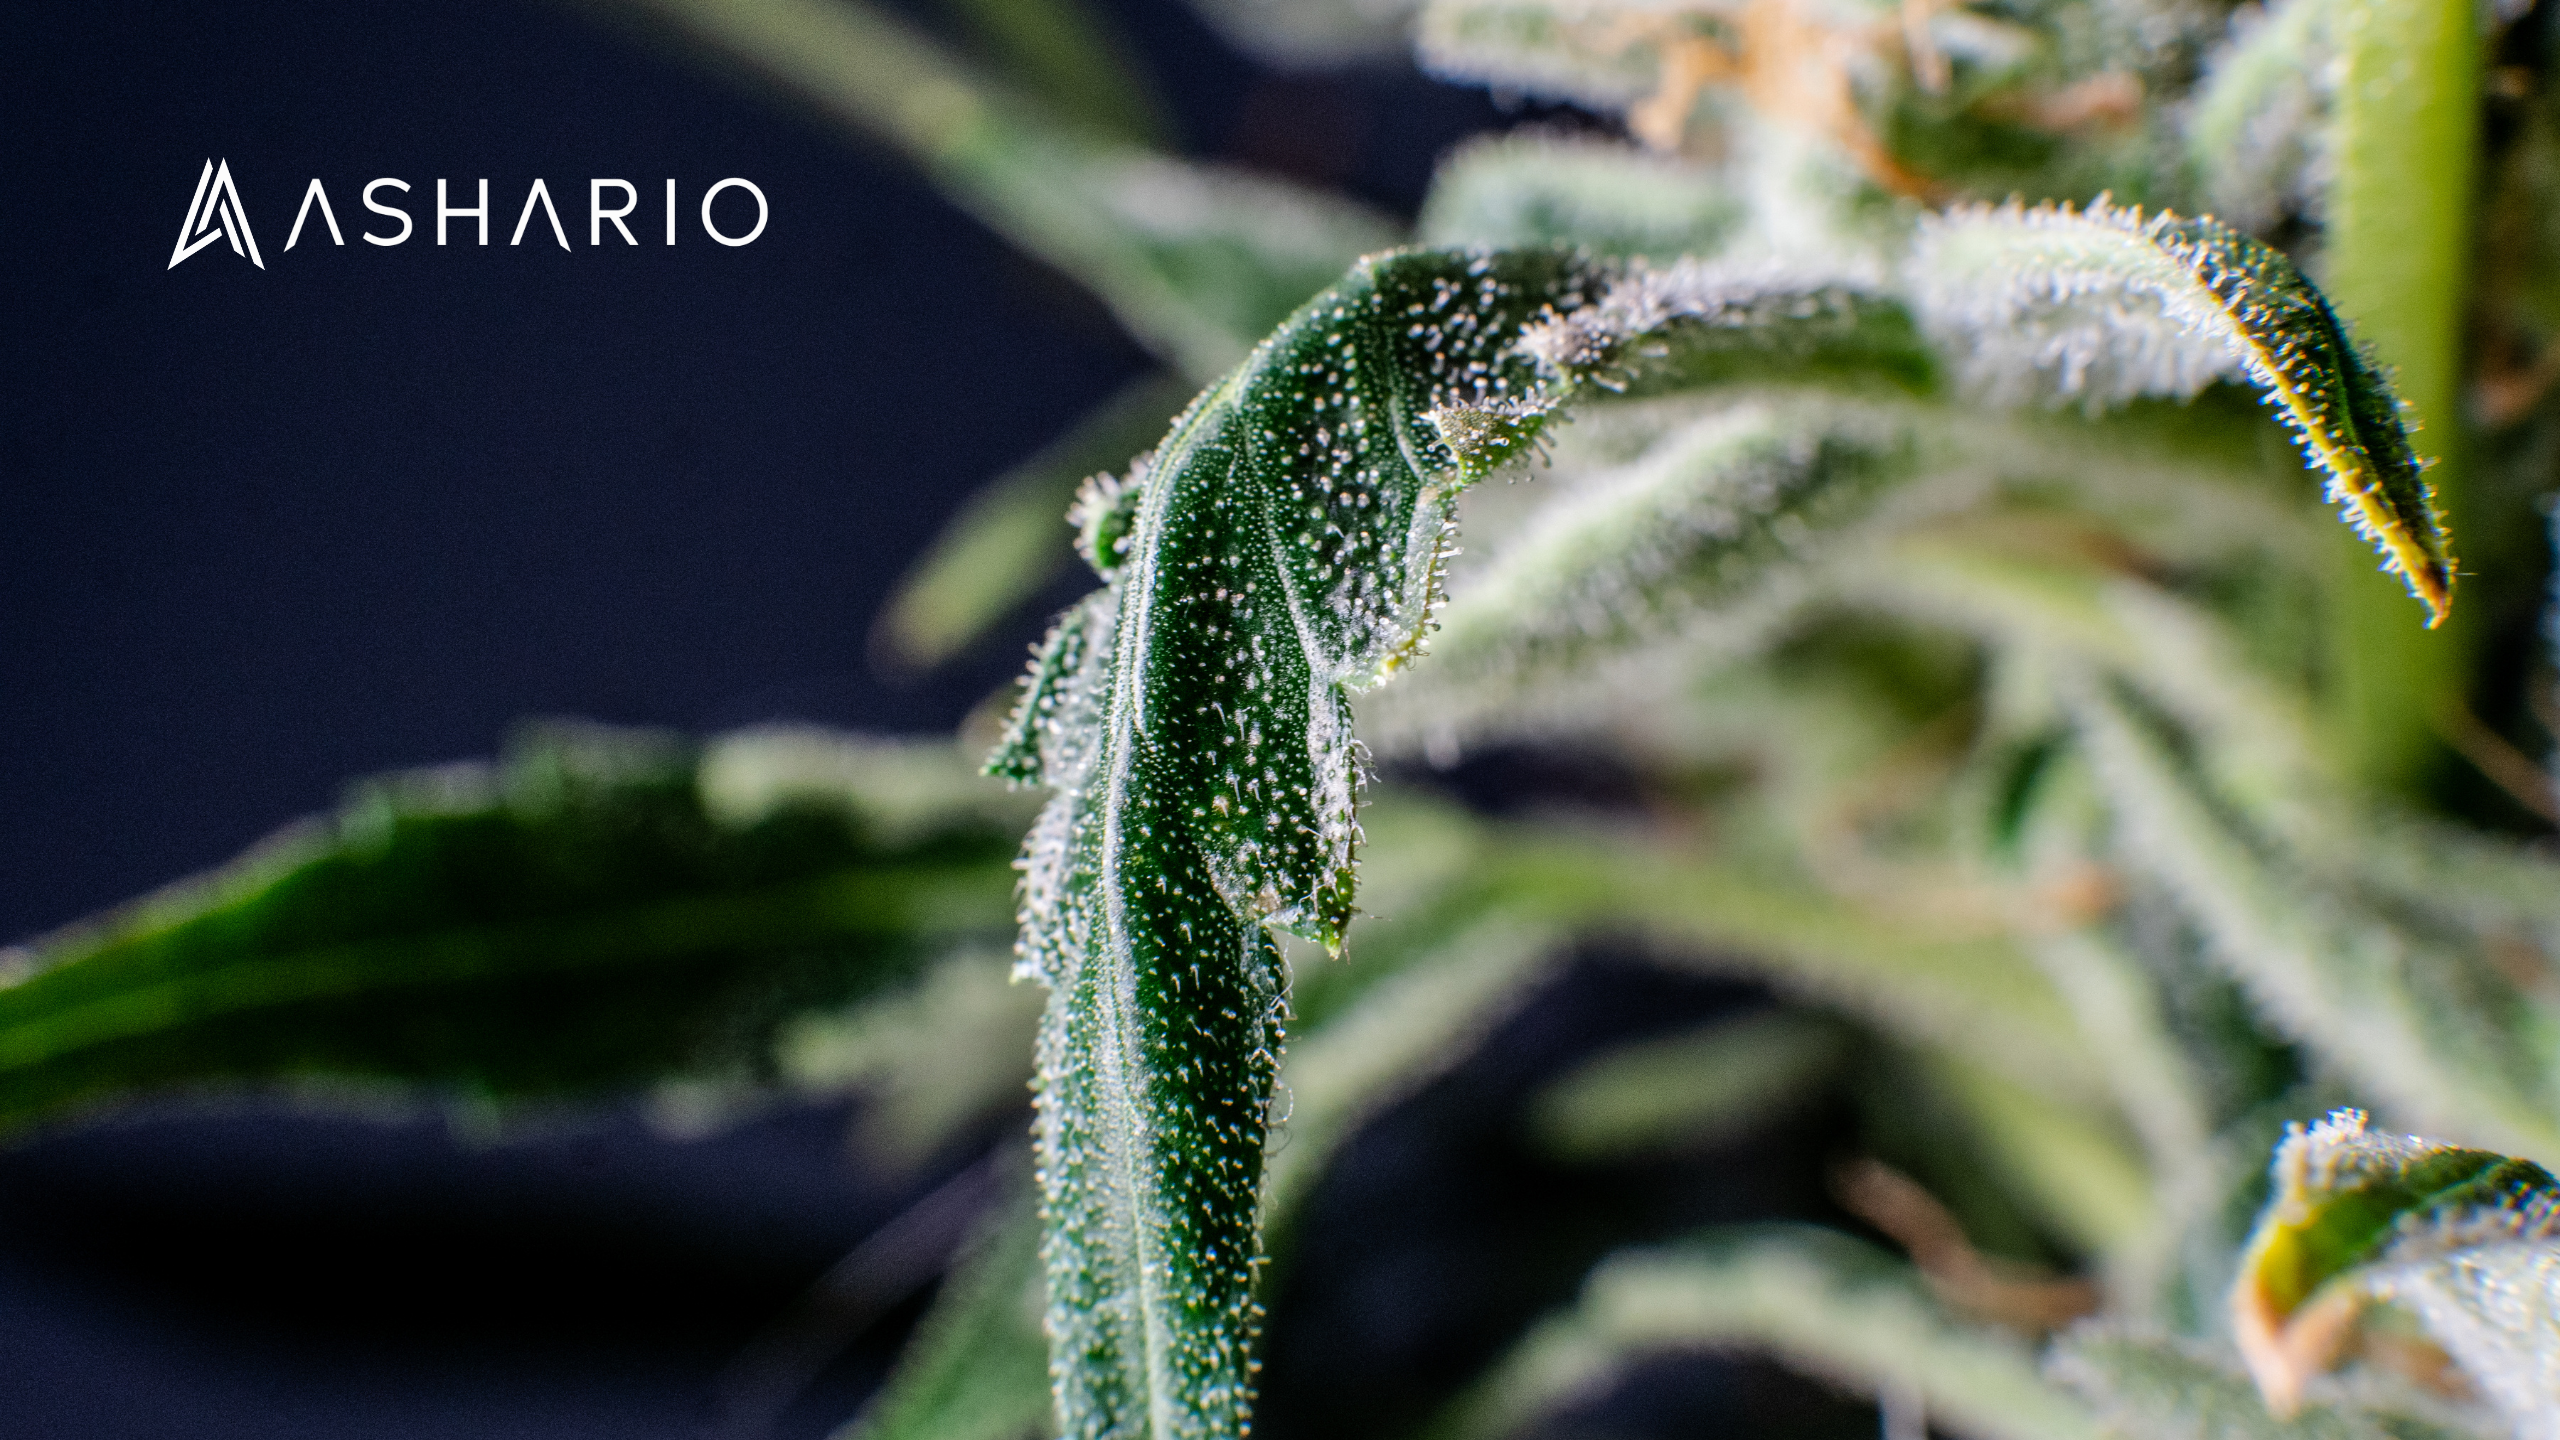 Explore the realm of potency with Ashario Cannabis' selection of the most potent marijuana strains. Our curated lineup features a range of cultivars known for their high THC content and powerful effects.